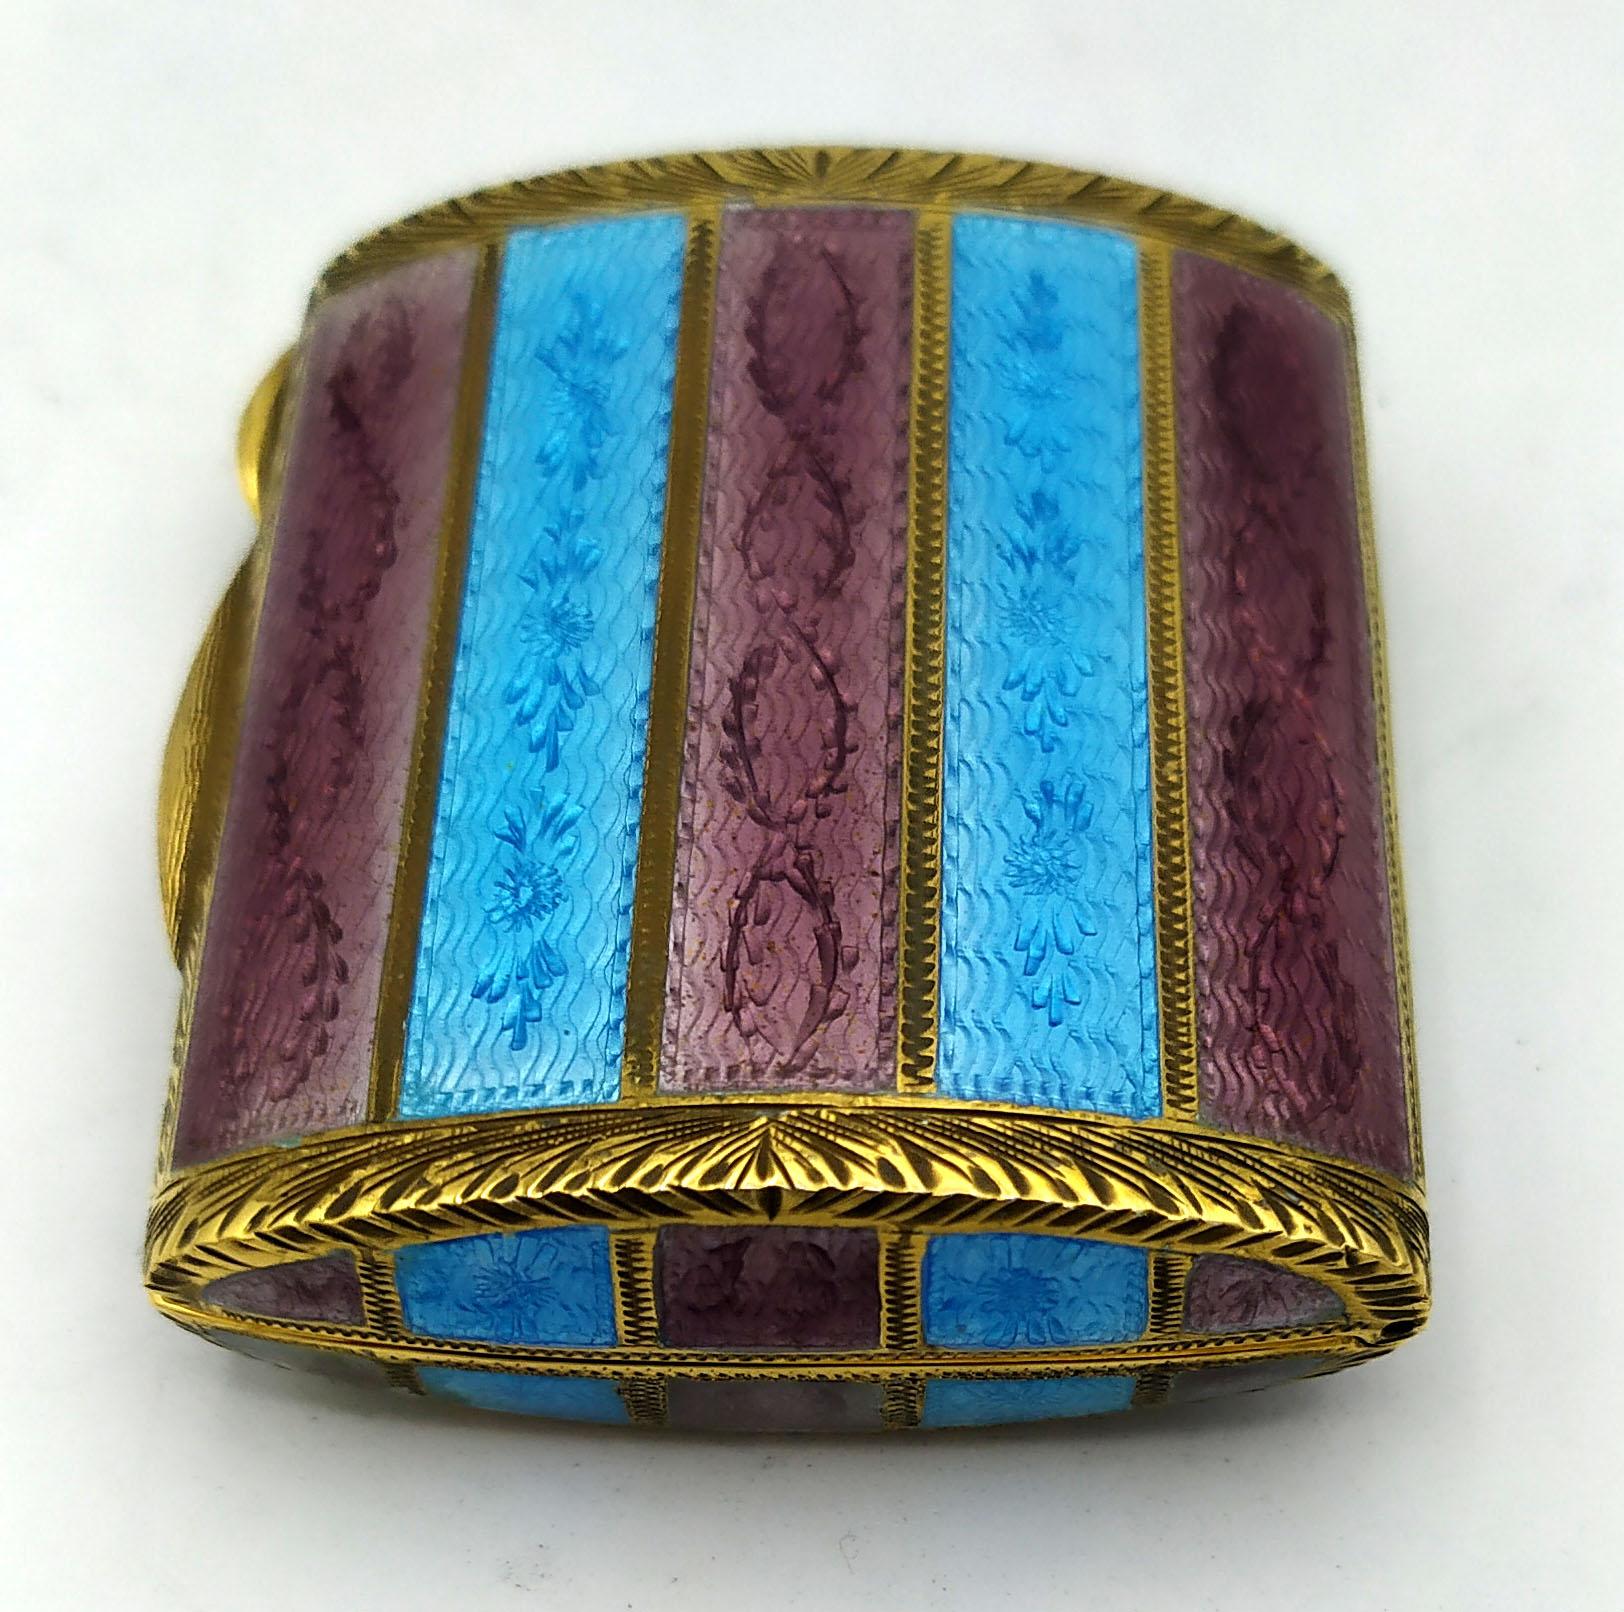 Square pill box with oval section in 925/1000 sterling silver gold plated with two-tone translucent fired enamels with guillochè stripes and hand-engraved motifs on all sides. George V English Empire style. Dimensions cm. 4.7 x 5.5 x 1.8. Weight gr.